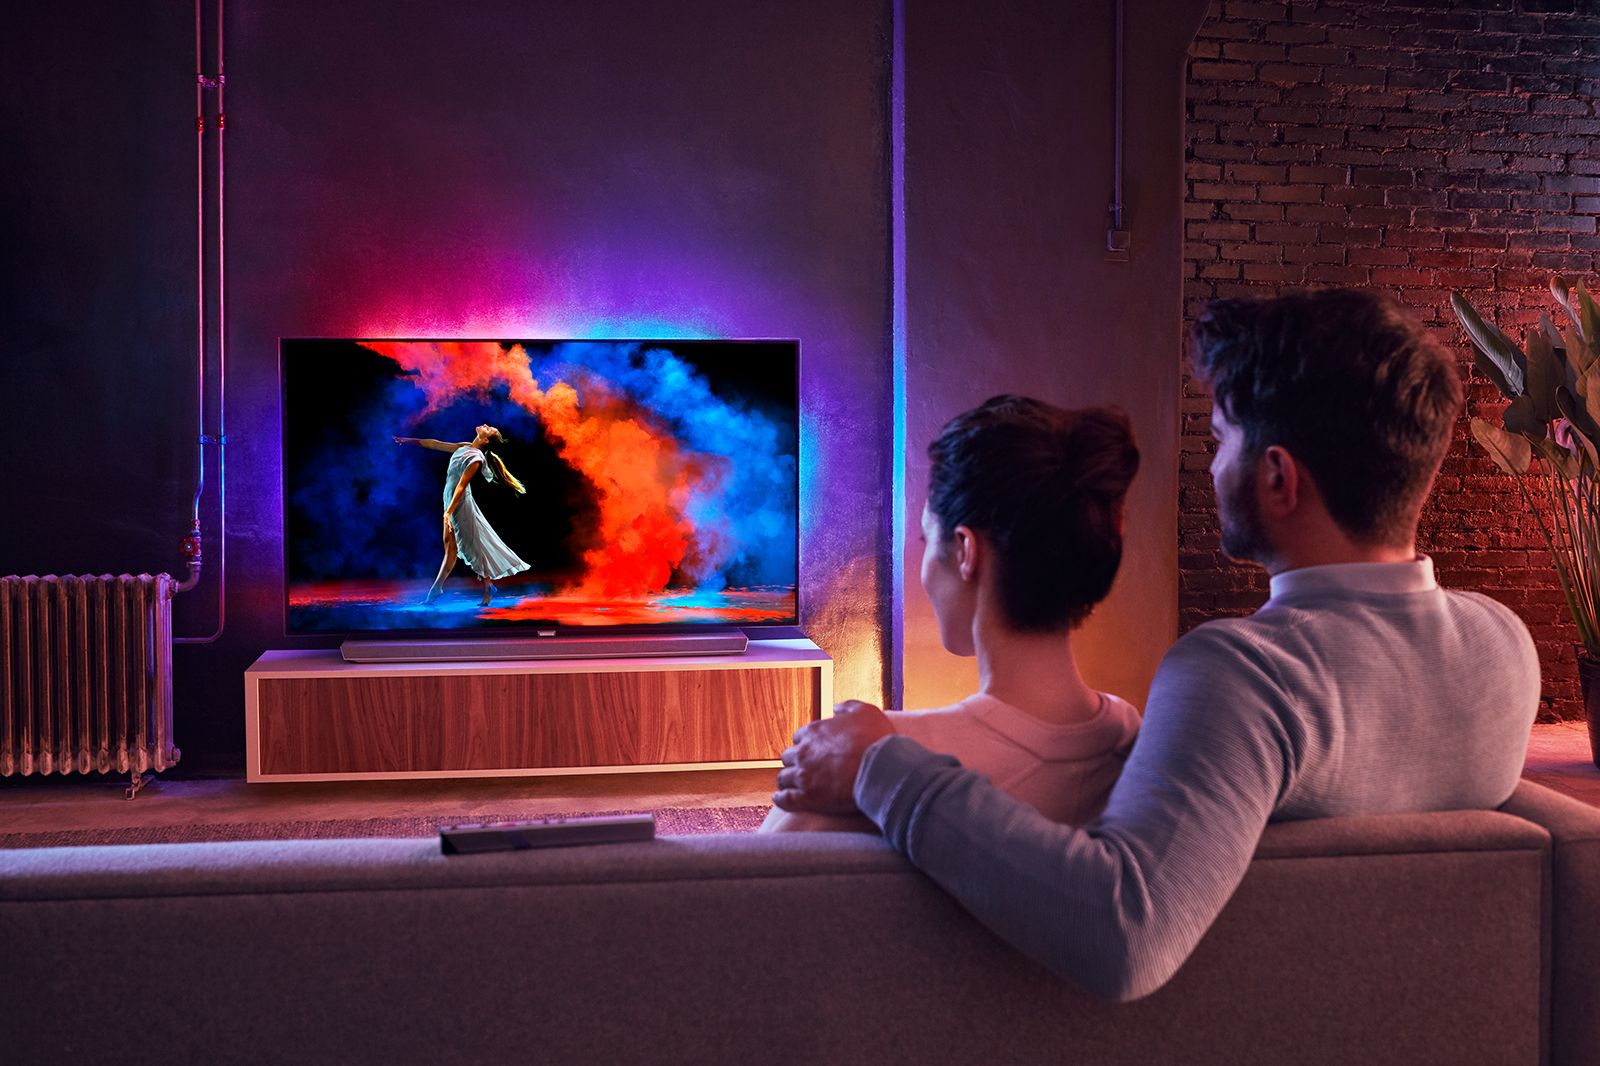 Why ambient light is key to your TV viewing experience image 1